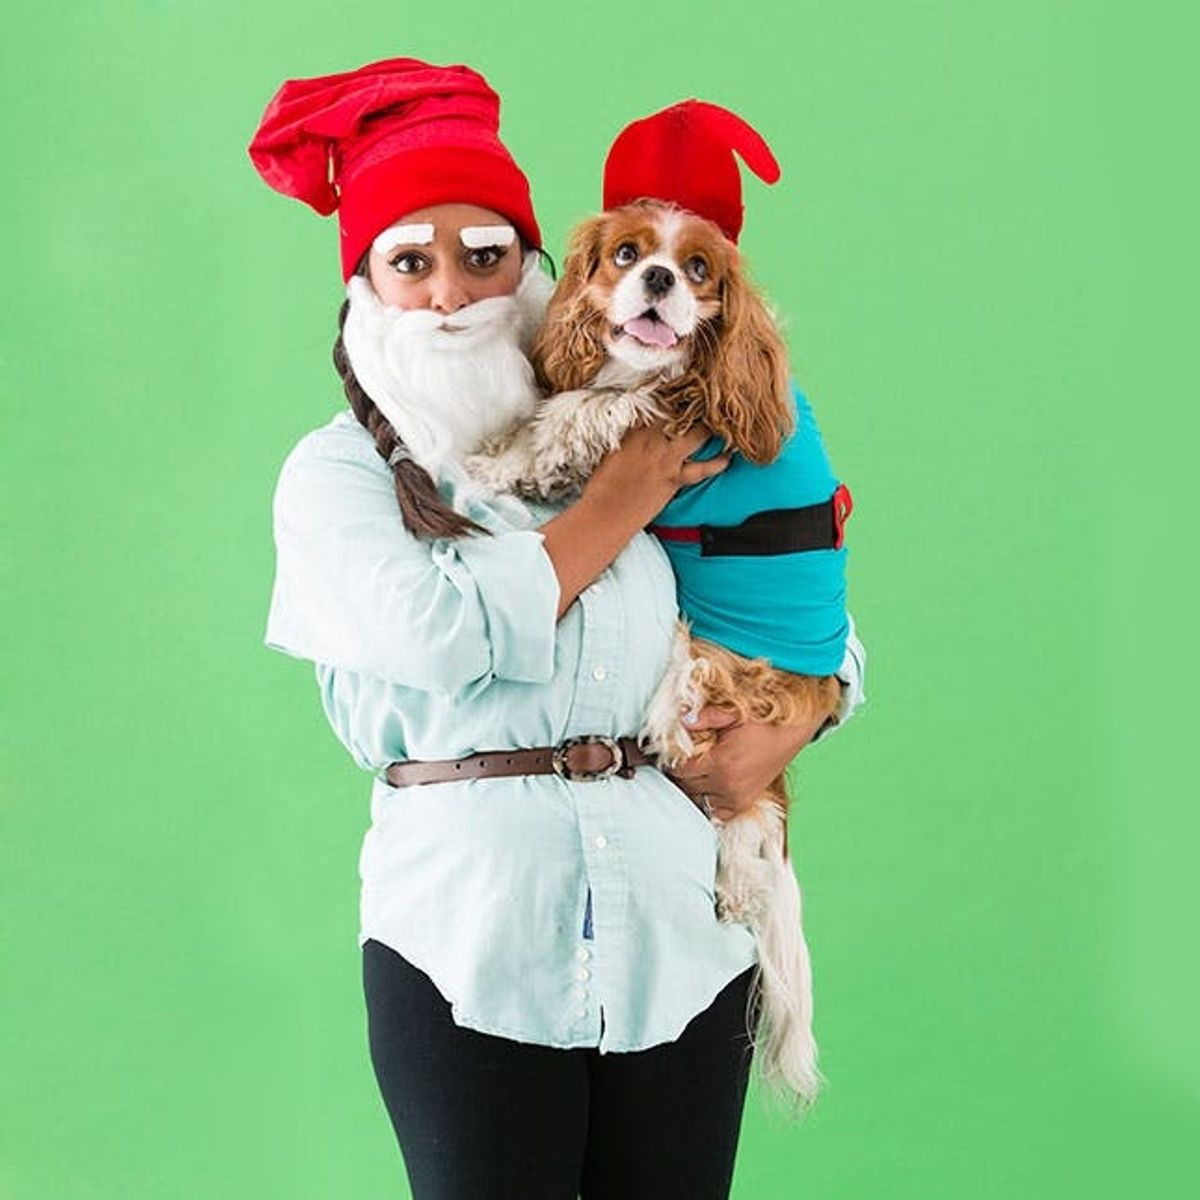 4 Funny DIY Dog and Dog Owner Costumes